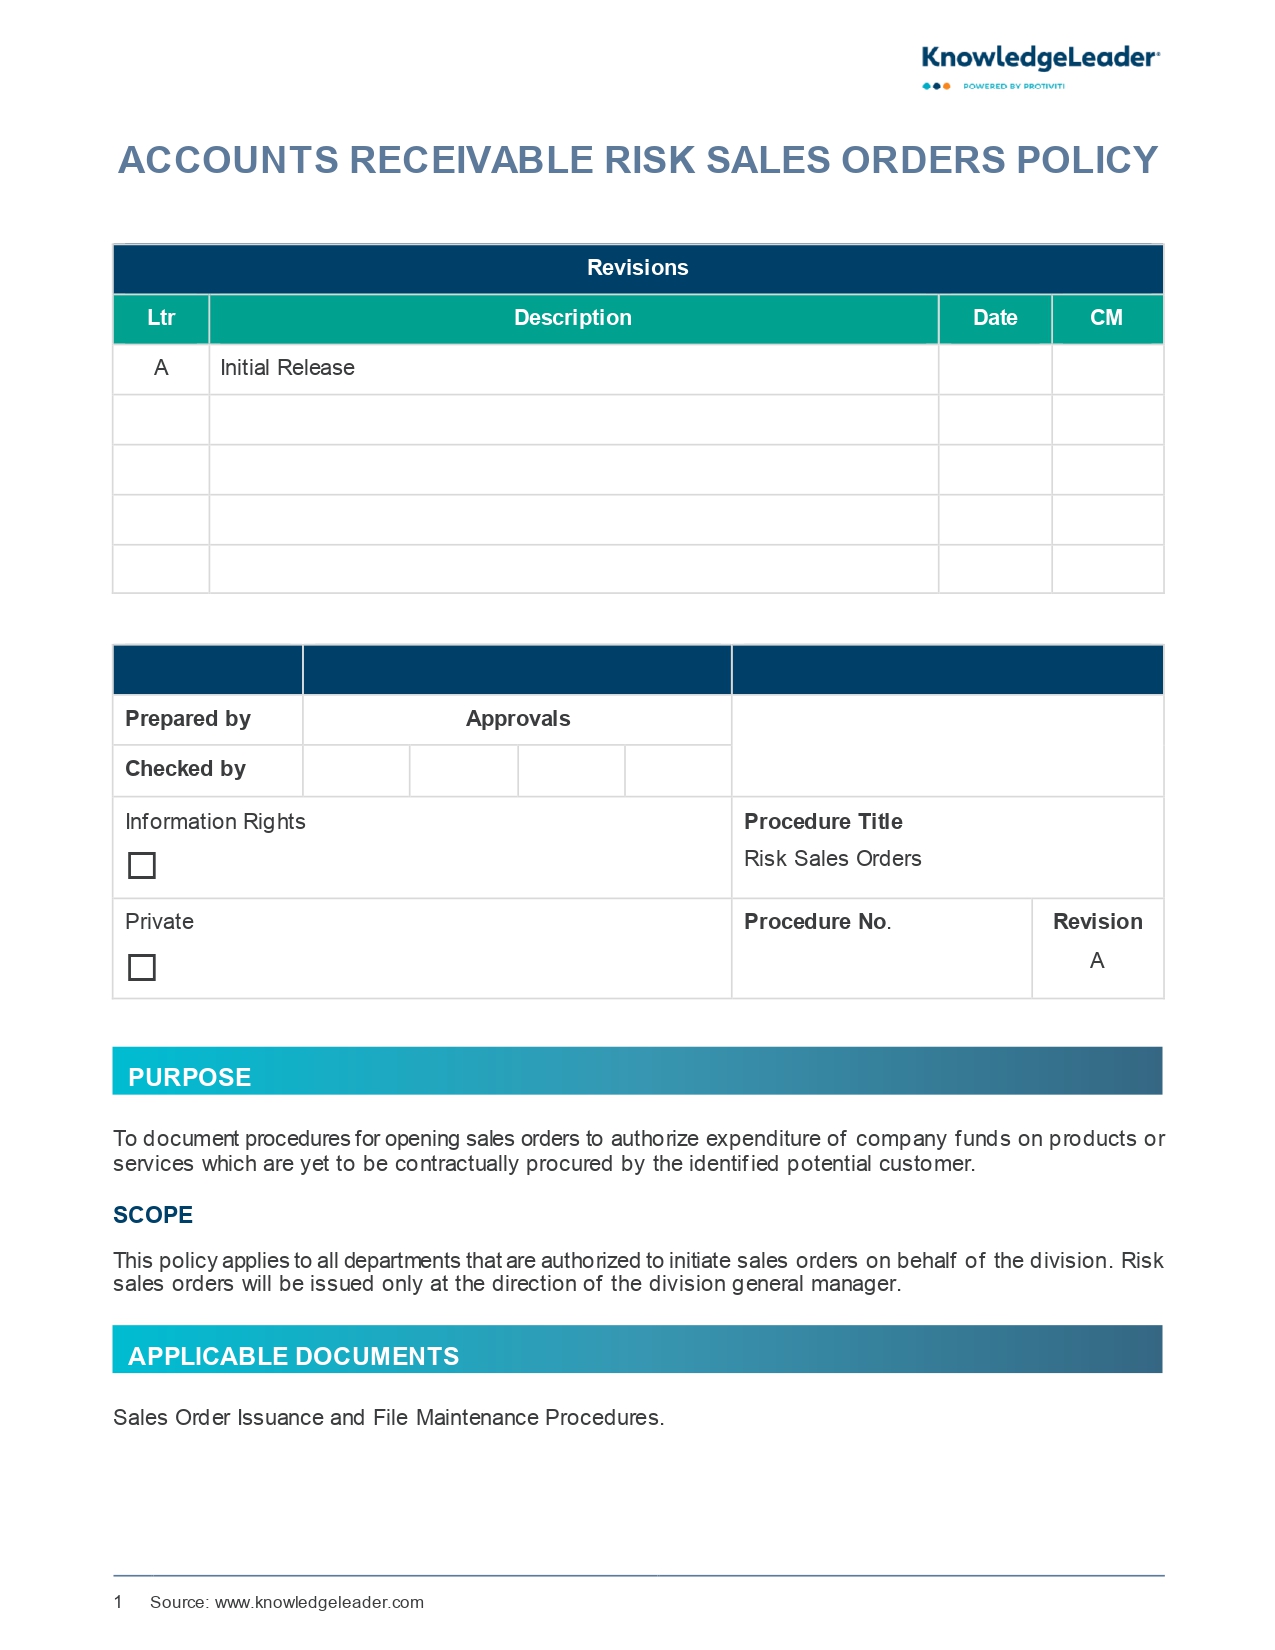 Screenshot of the first page of Accounts Receivable Risk Sales Orders Policy